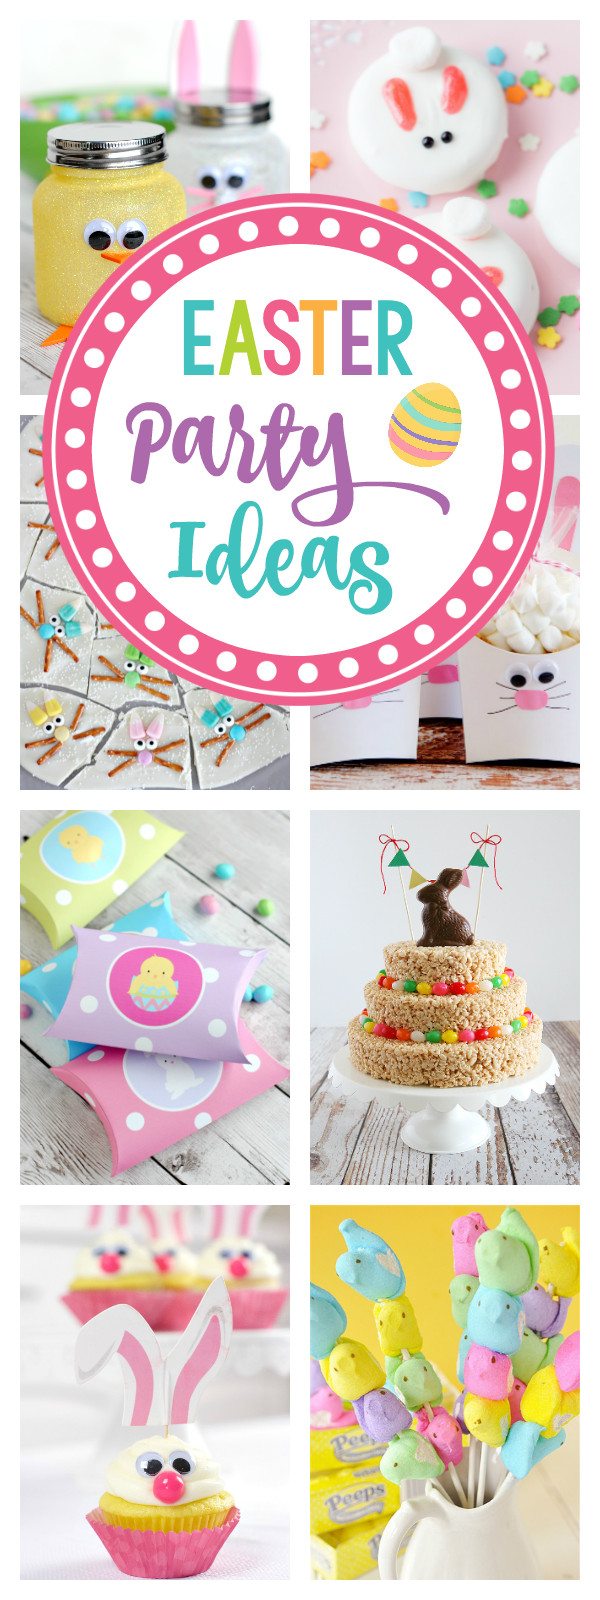 Easter Party Food Ideas Kids
 25 Fun Easter Party Ideas for Kids – Fun Squared